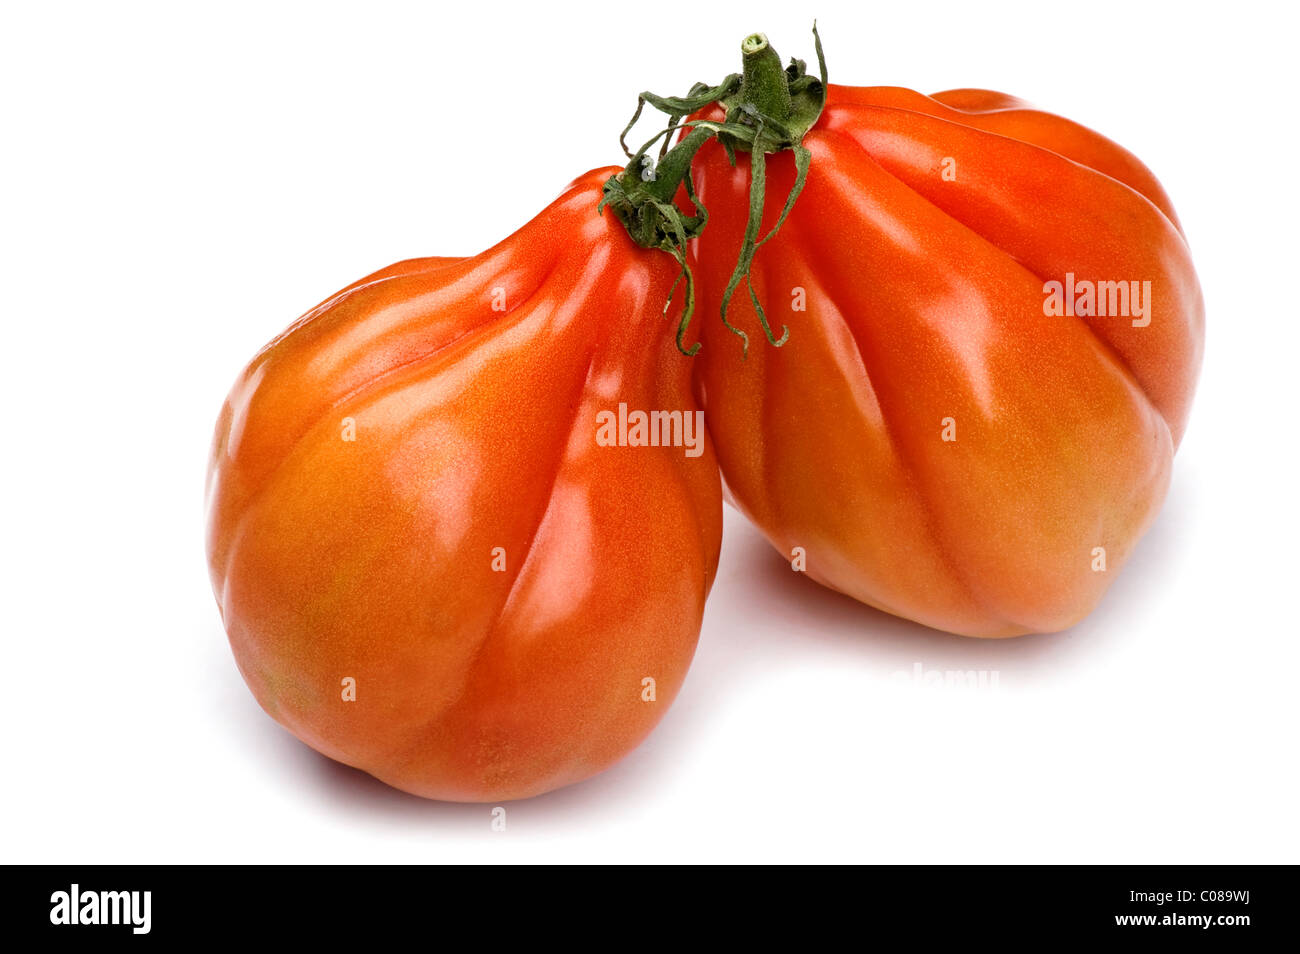 object on white - food Red tomato close up Stock Photo